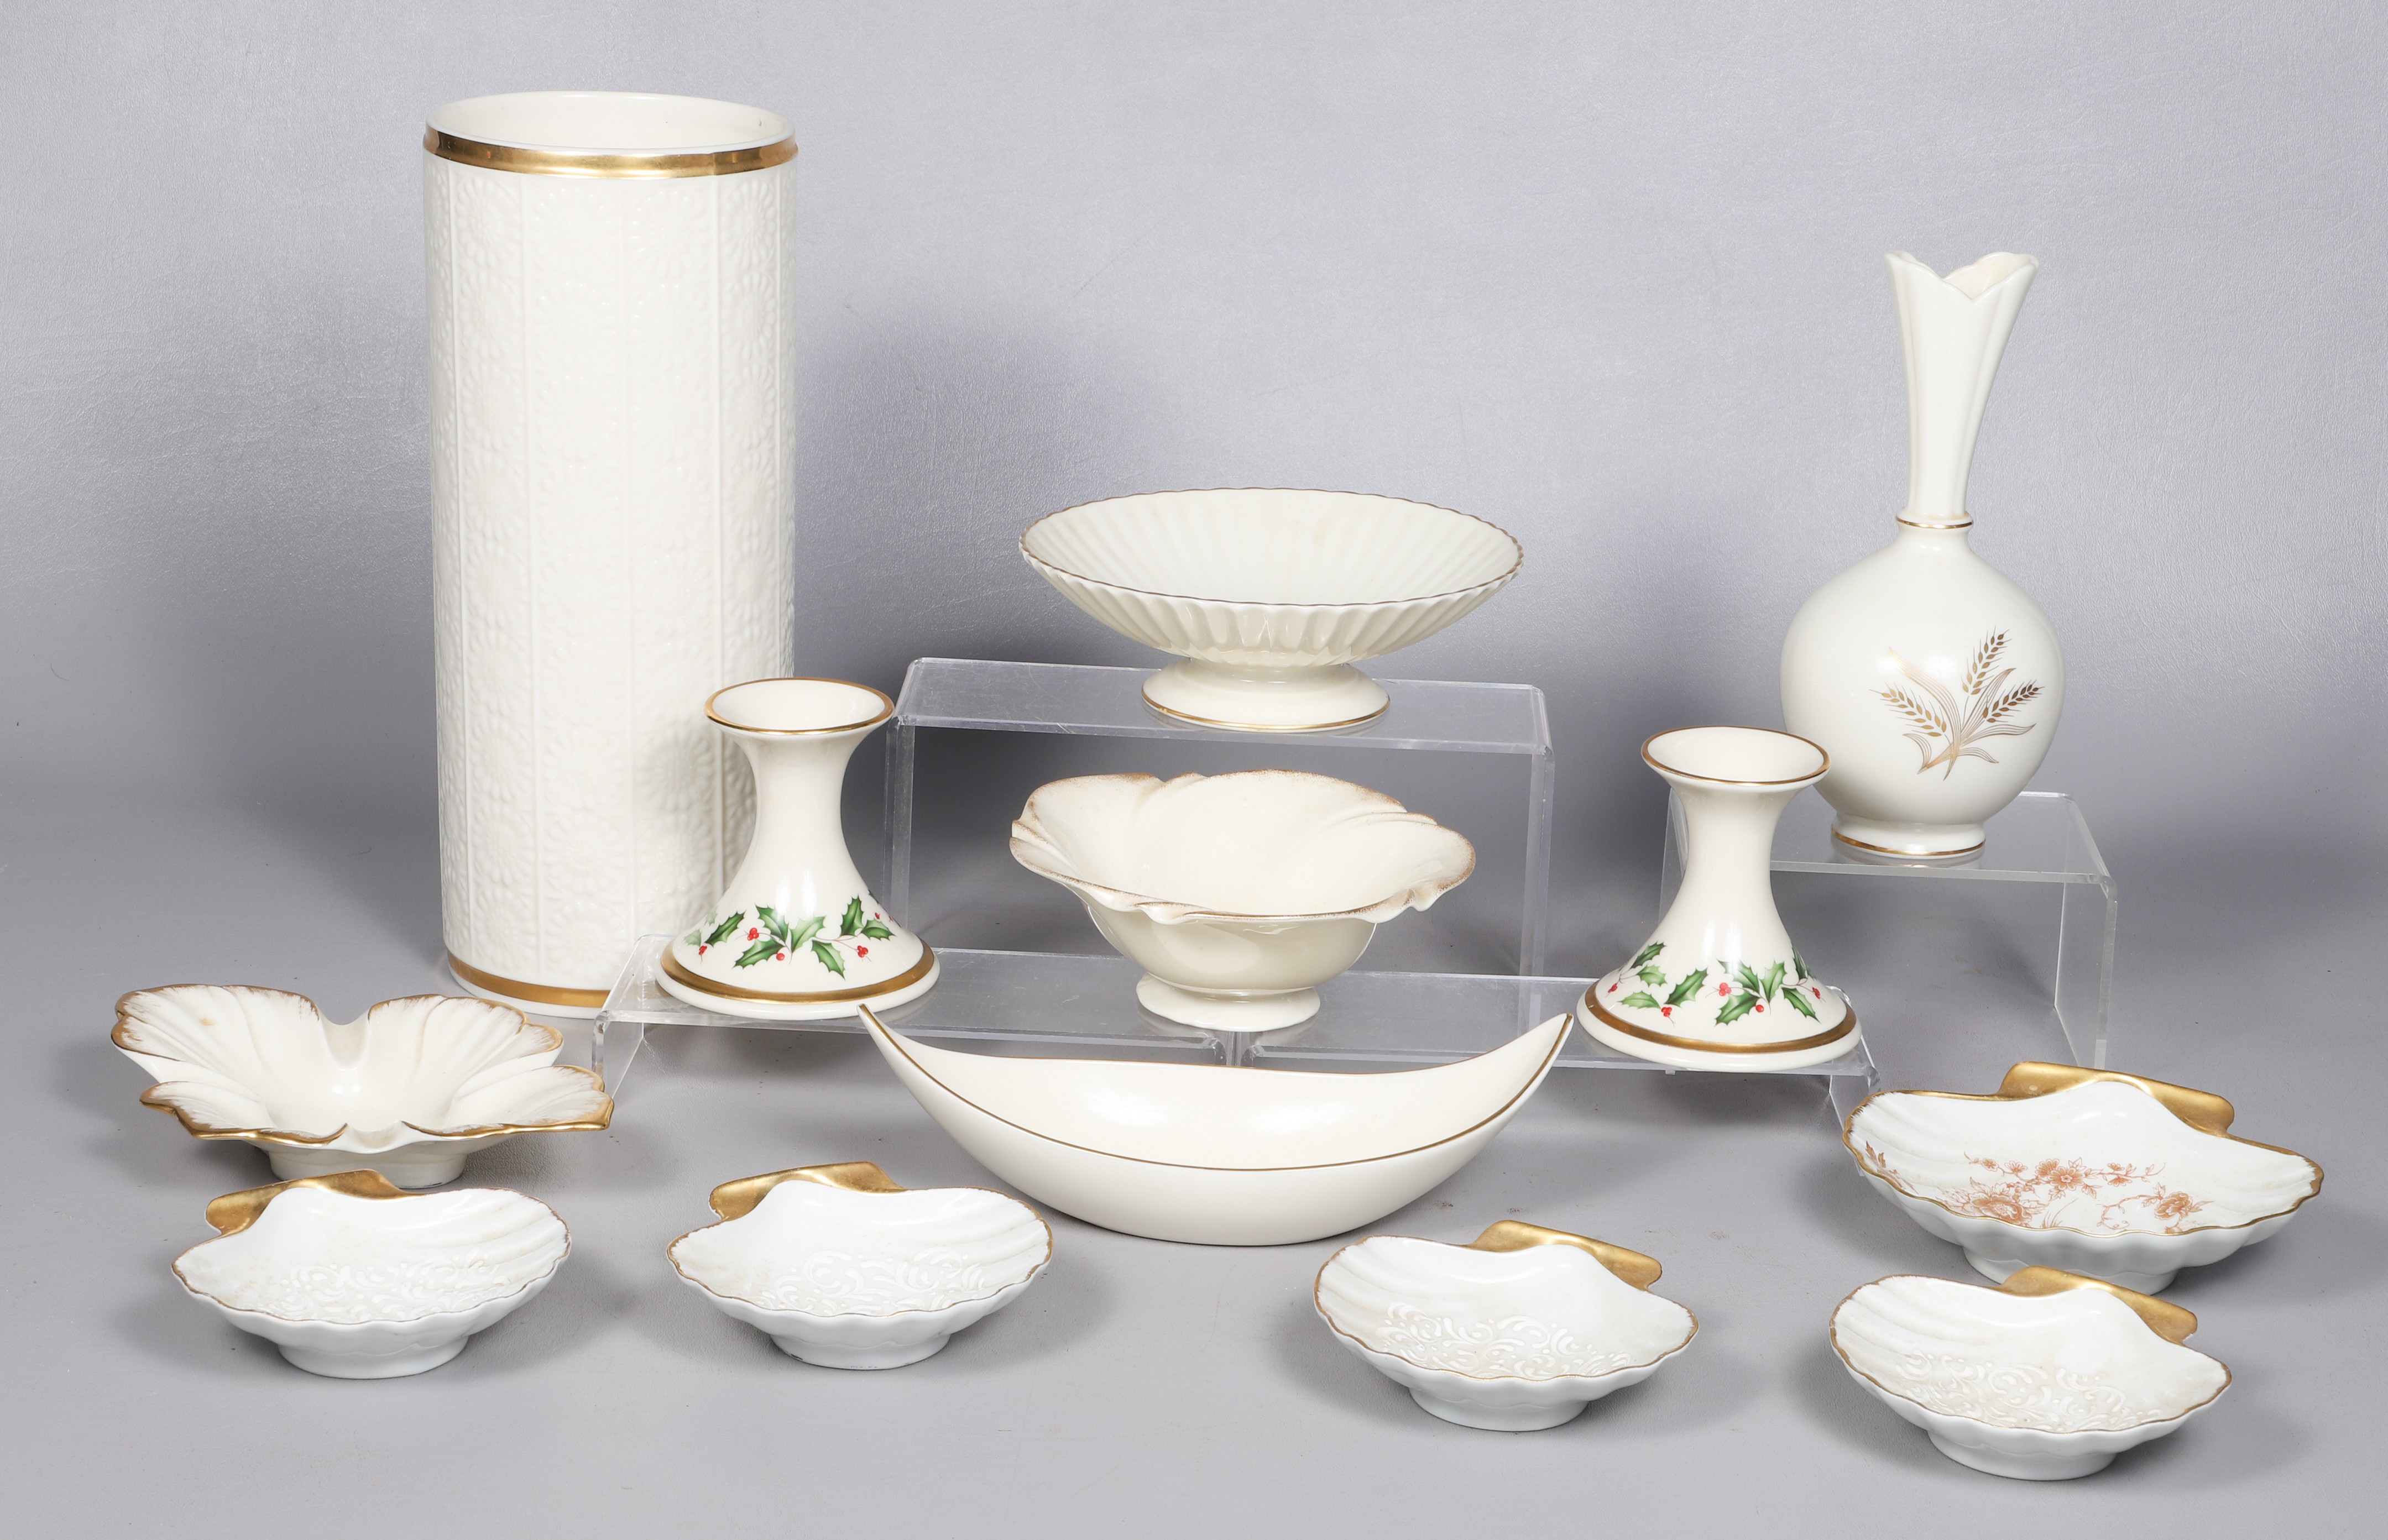 Lenox vases and table items to 2e1107